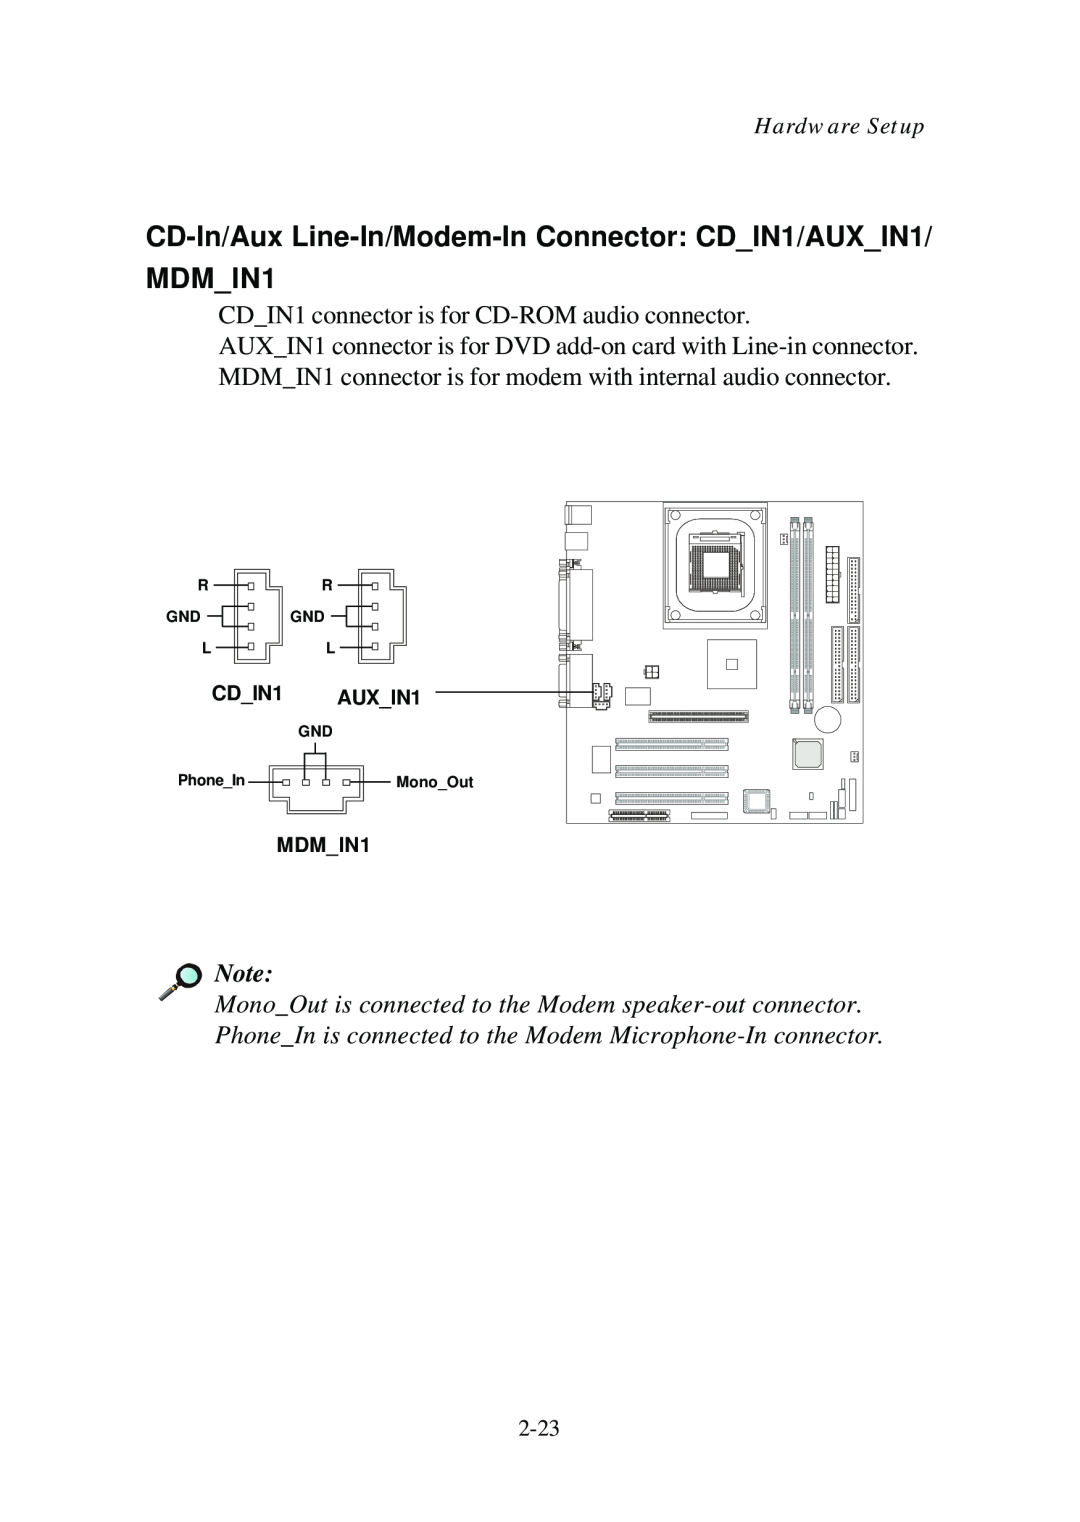 Premio Computer Aries/Centella manual CD-In/Aux Line-In/Modem-In Connector CDIN1/AUXIN1/ MDMIN1, Hardware Setup 